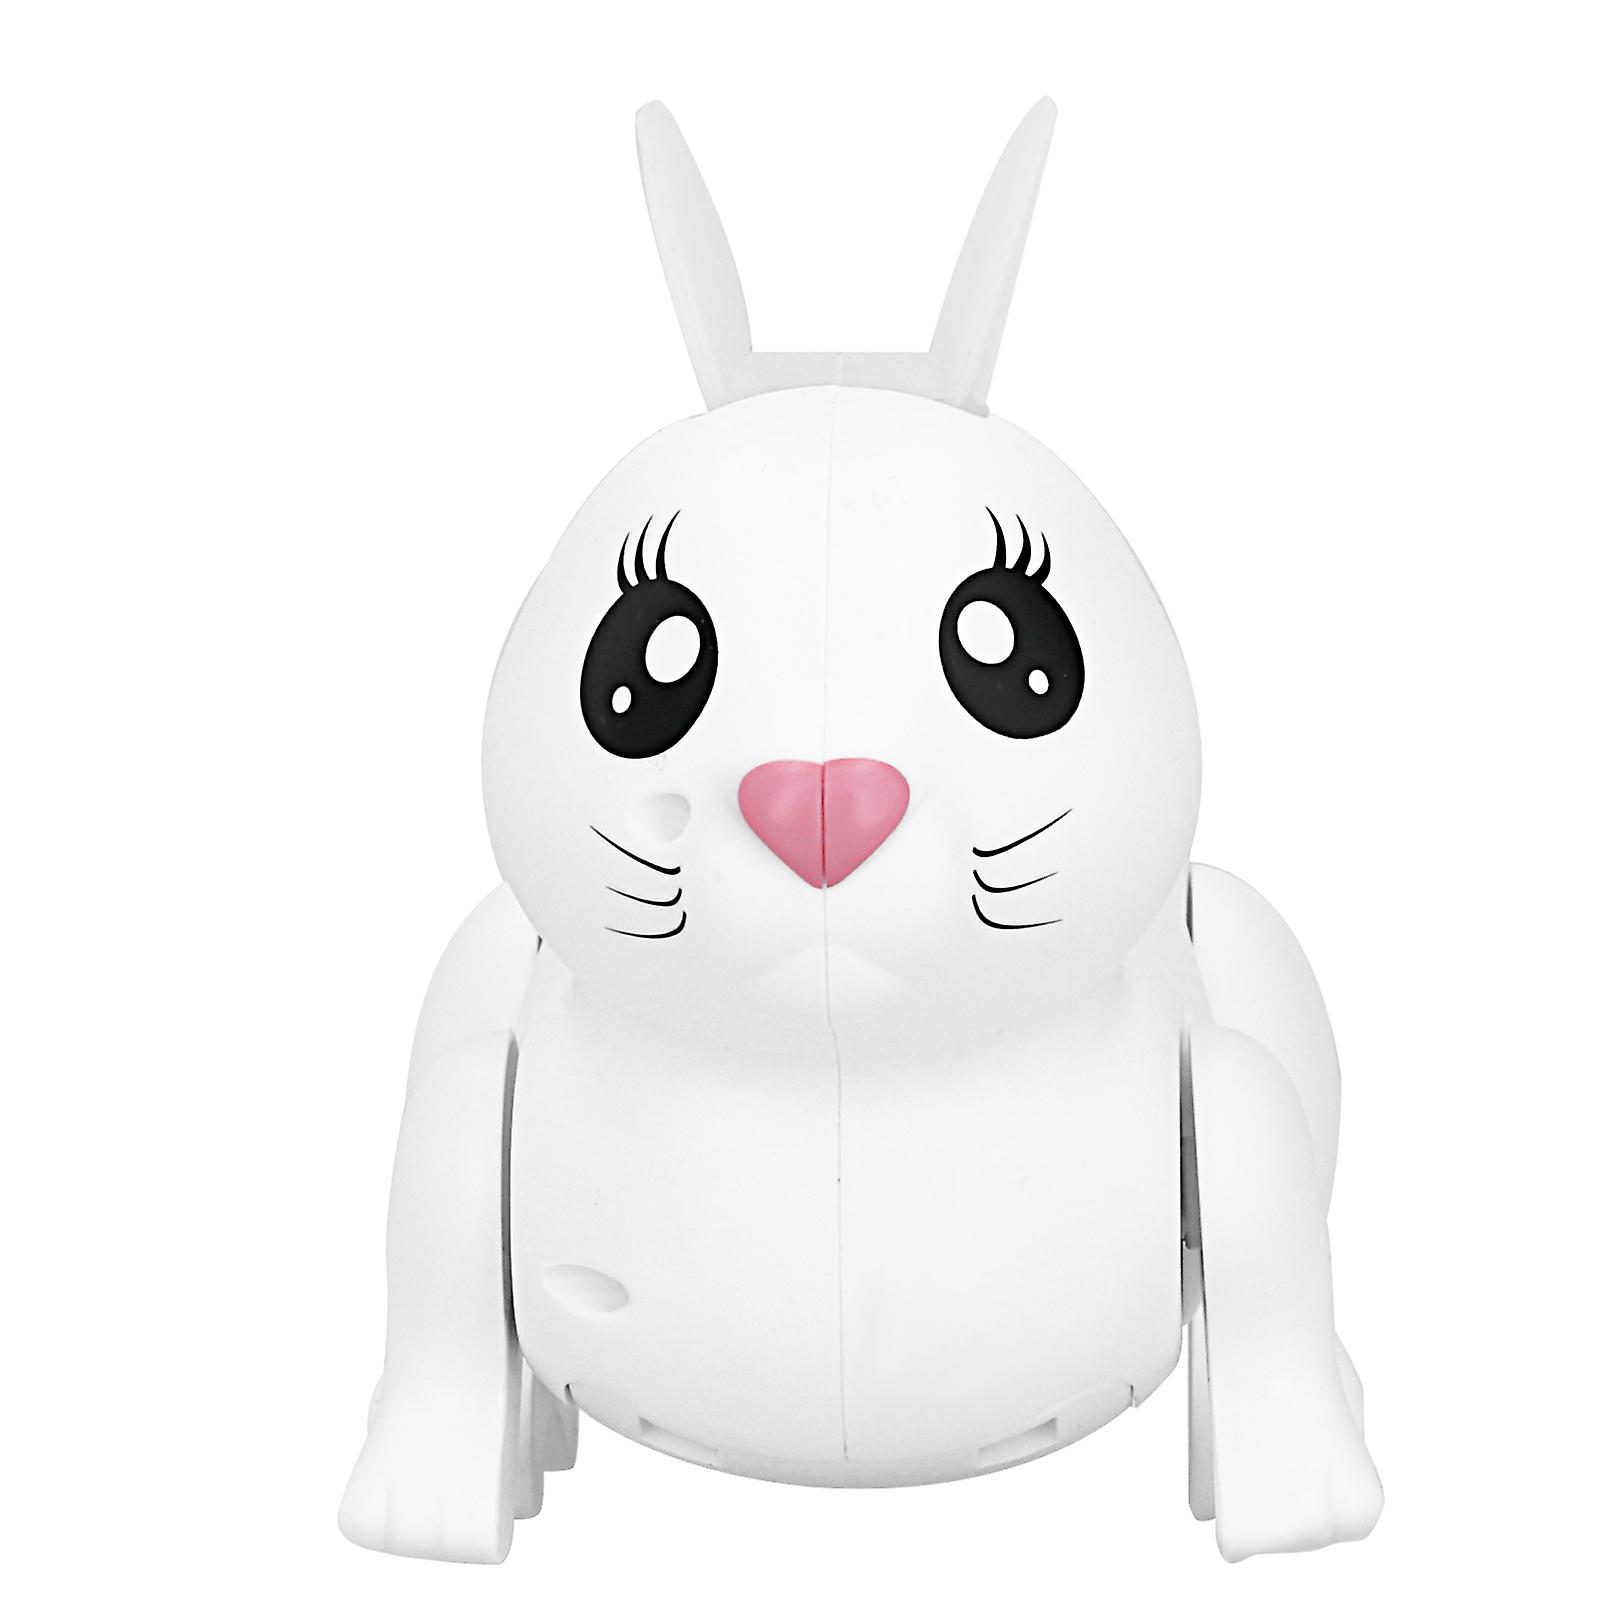 Electronic Jumping Rabbit Sound Light Simulation Bunny Model Funny Children Toy Giftwhite